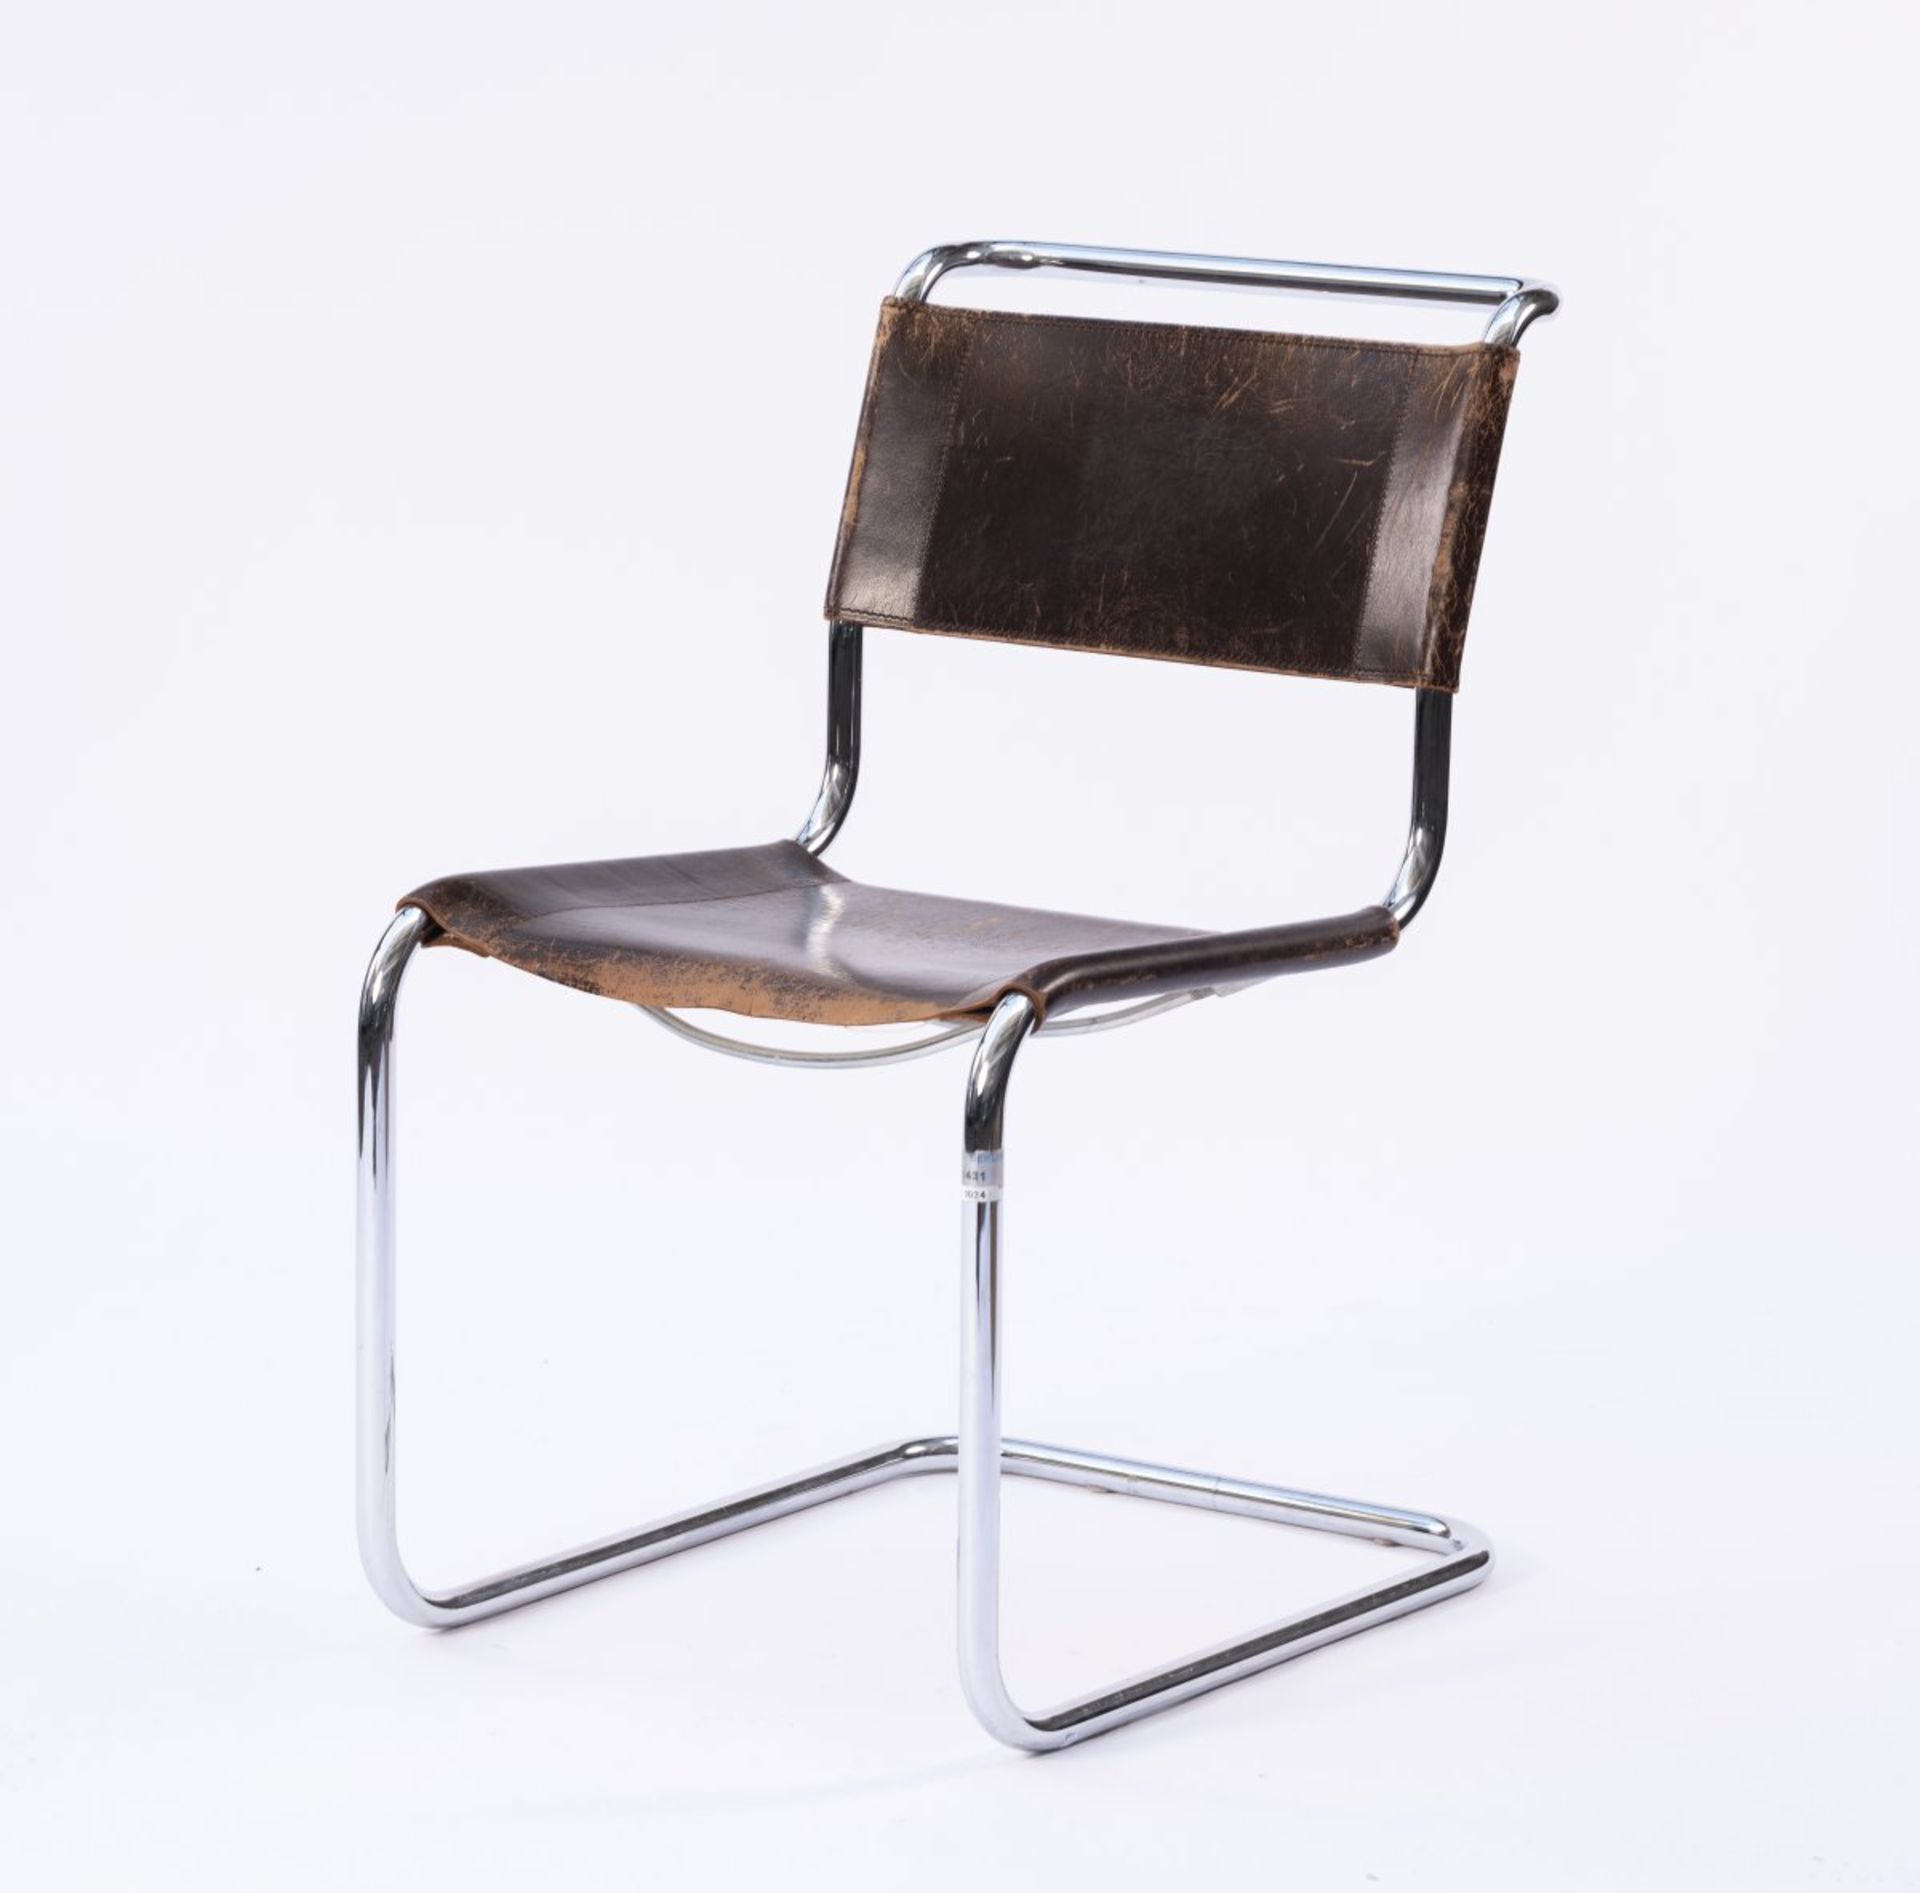 Marcel Breuer, Eight chairs 'B 33', 1927/28 - Image 8 of 14